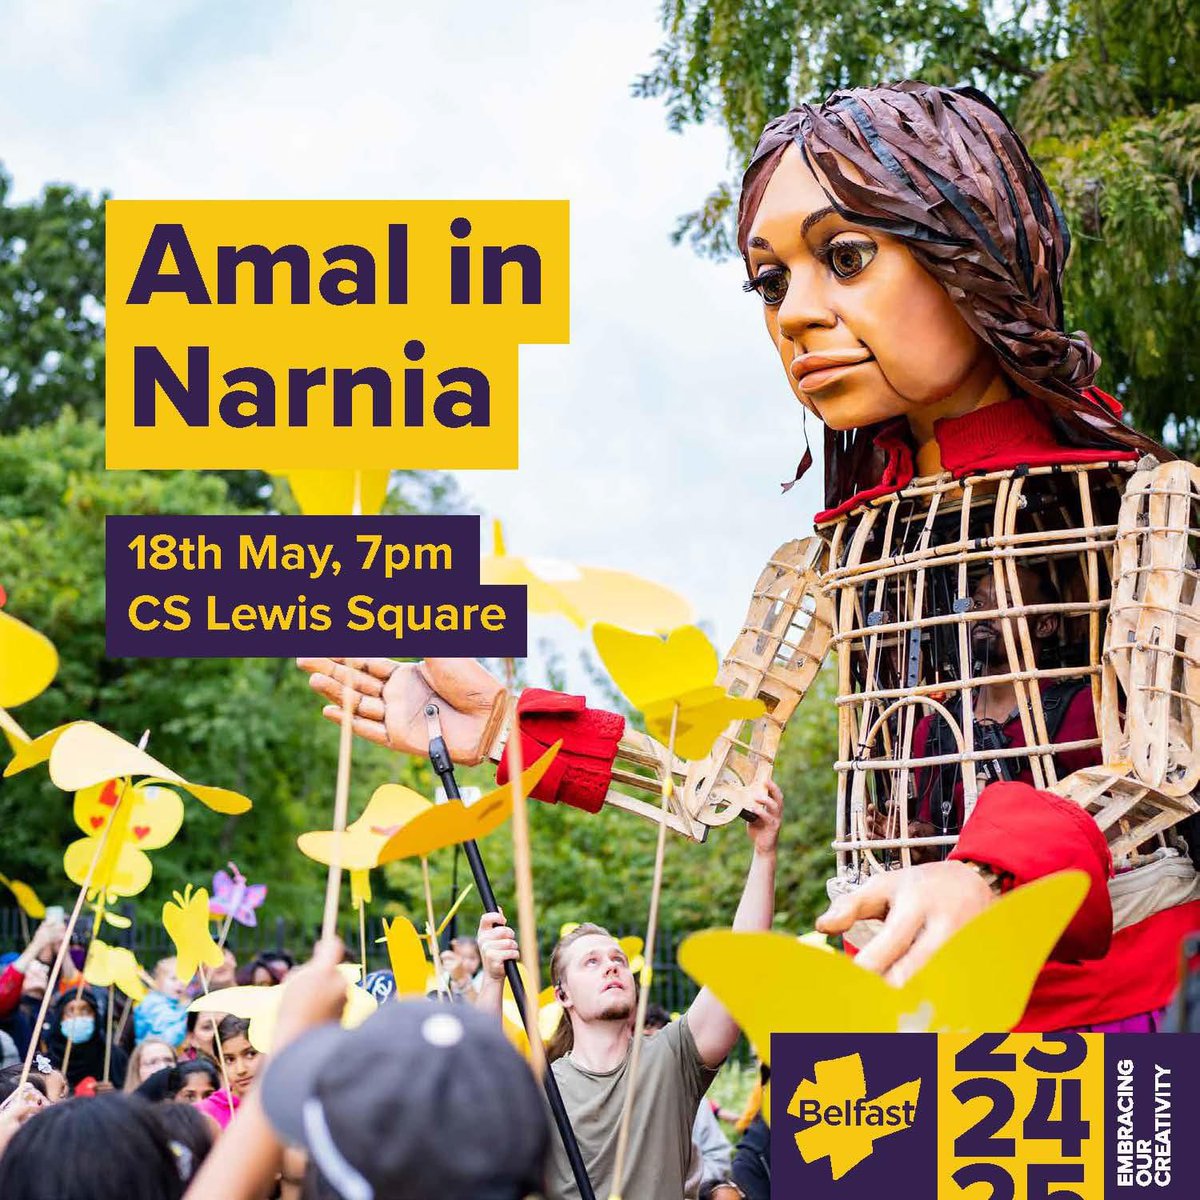 Amal in Narnia 🦁 Amal ventures into East Belfast where she discovers a large wardrobe in the centre of CS Lewis Square. She meets Mr Tumnus, Lucy, Edmund and Peter and they go into the wardrobe which transports them to the land of Narnia. Who will Amal meet and what will she